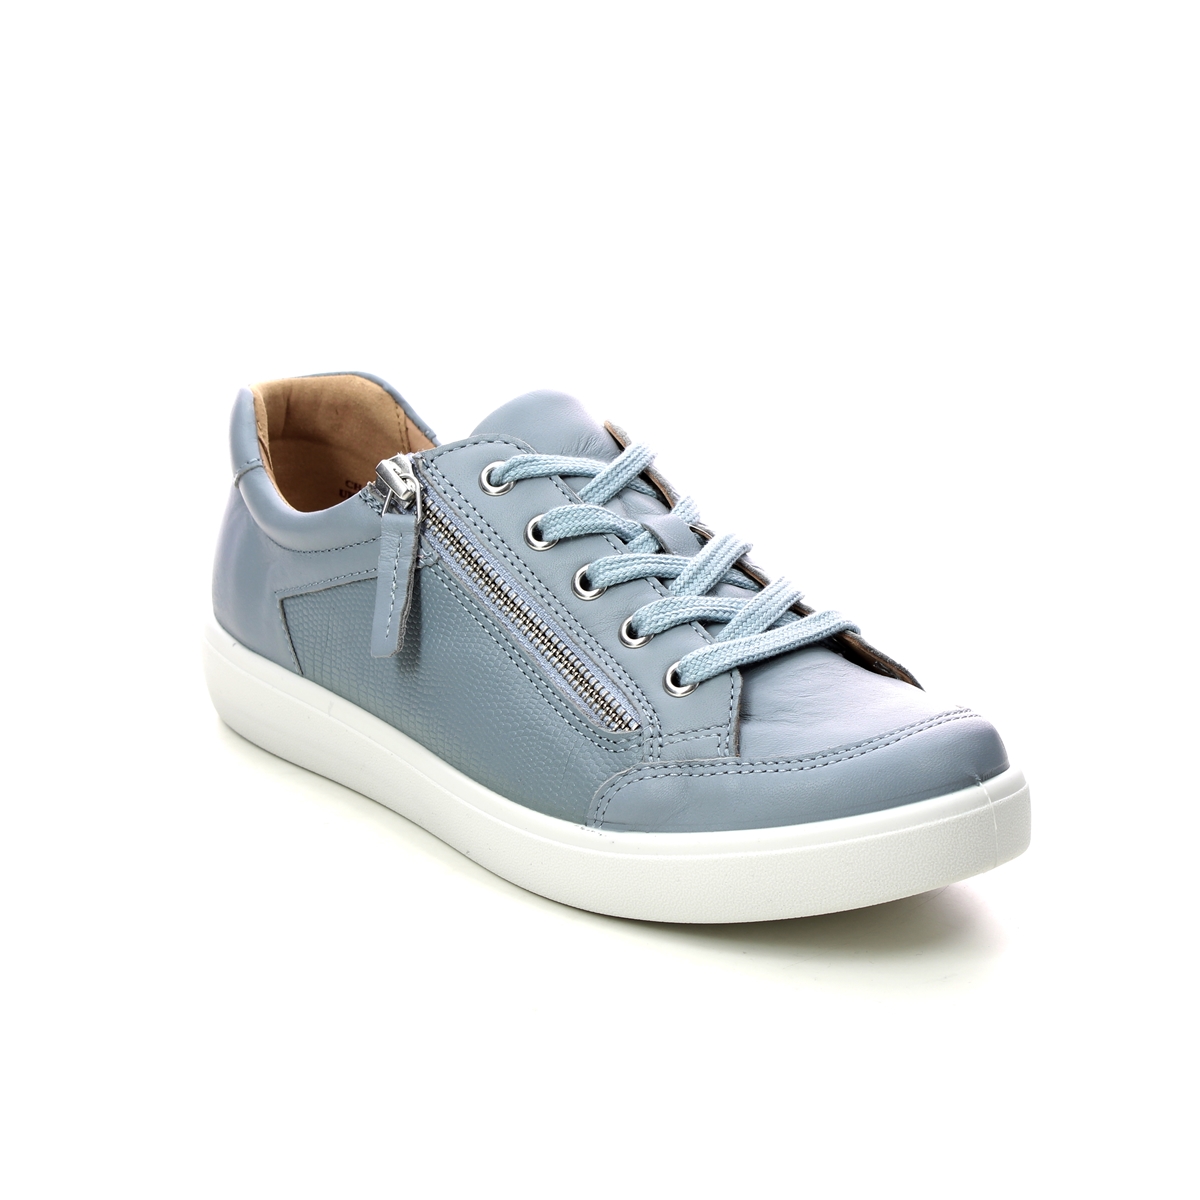 Hotter Chase 2 Wide 16113-74 Pale blue trainers